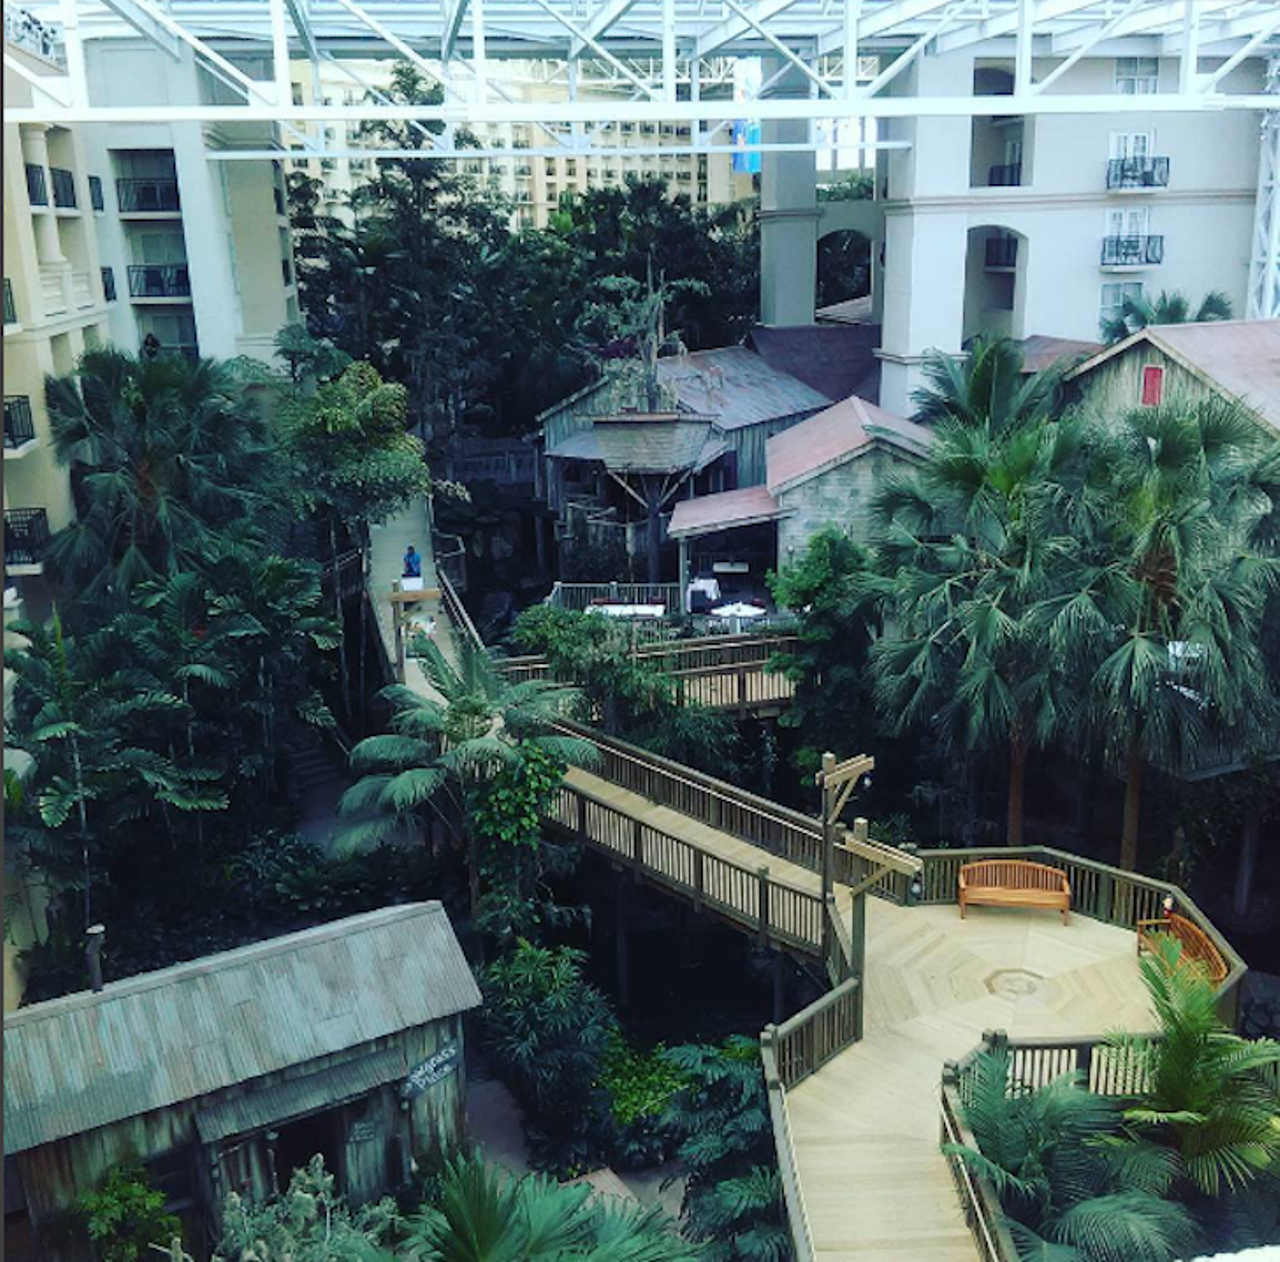 Check out the Gaylord Palms Atrium
6000 W. Osceola Parkway, Kissimmee, 407-586-0000 
The hotel&#146;s 4.6-acre glass-covered atrium features four sections that can surely kill a few hours. The St. Augustine section&#146;s alligator exhibit is perhaps the hotel&#146;s most noteworthy feature.
Photo via antwainmoney/Instagram